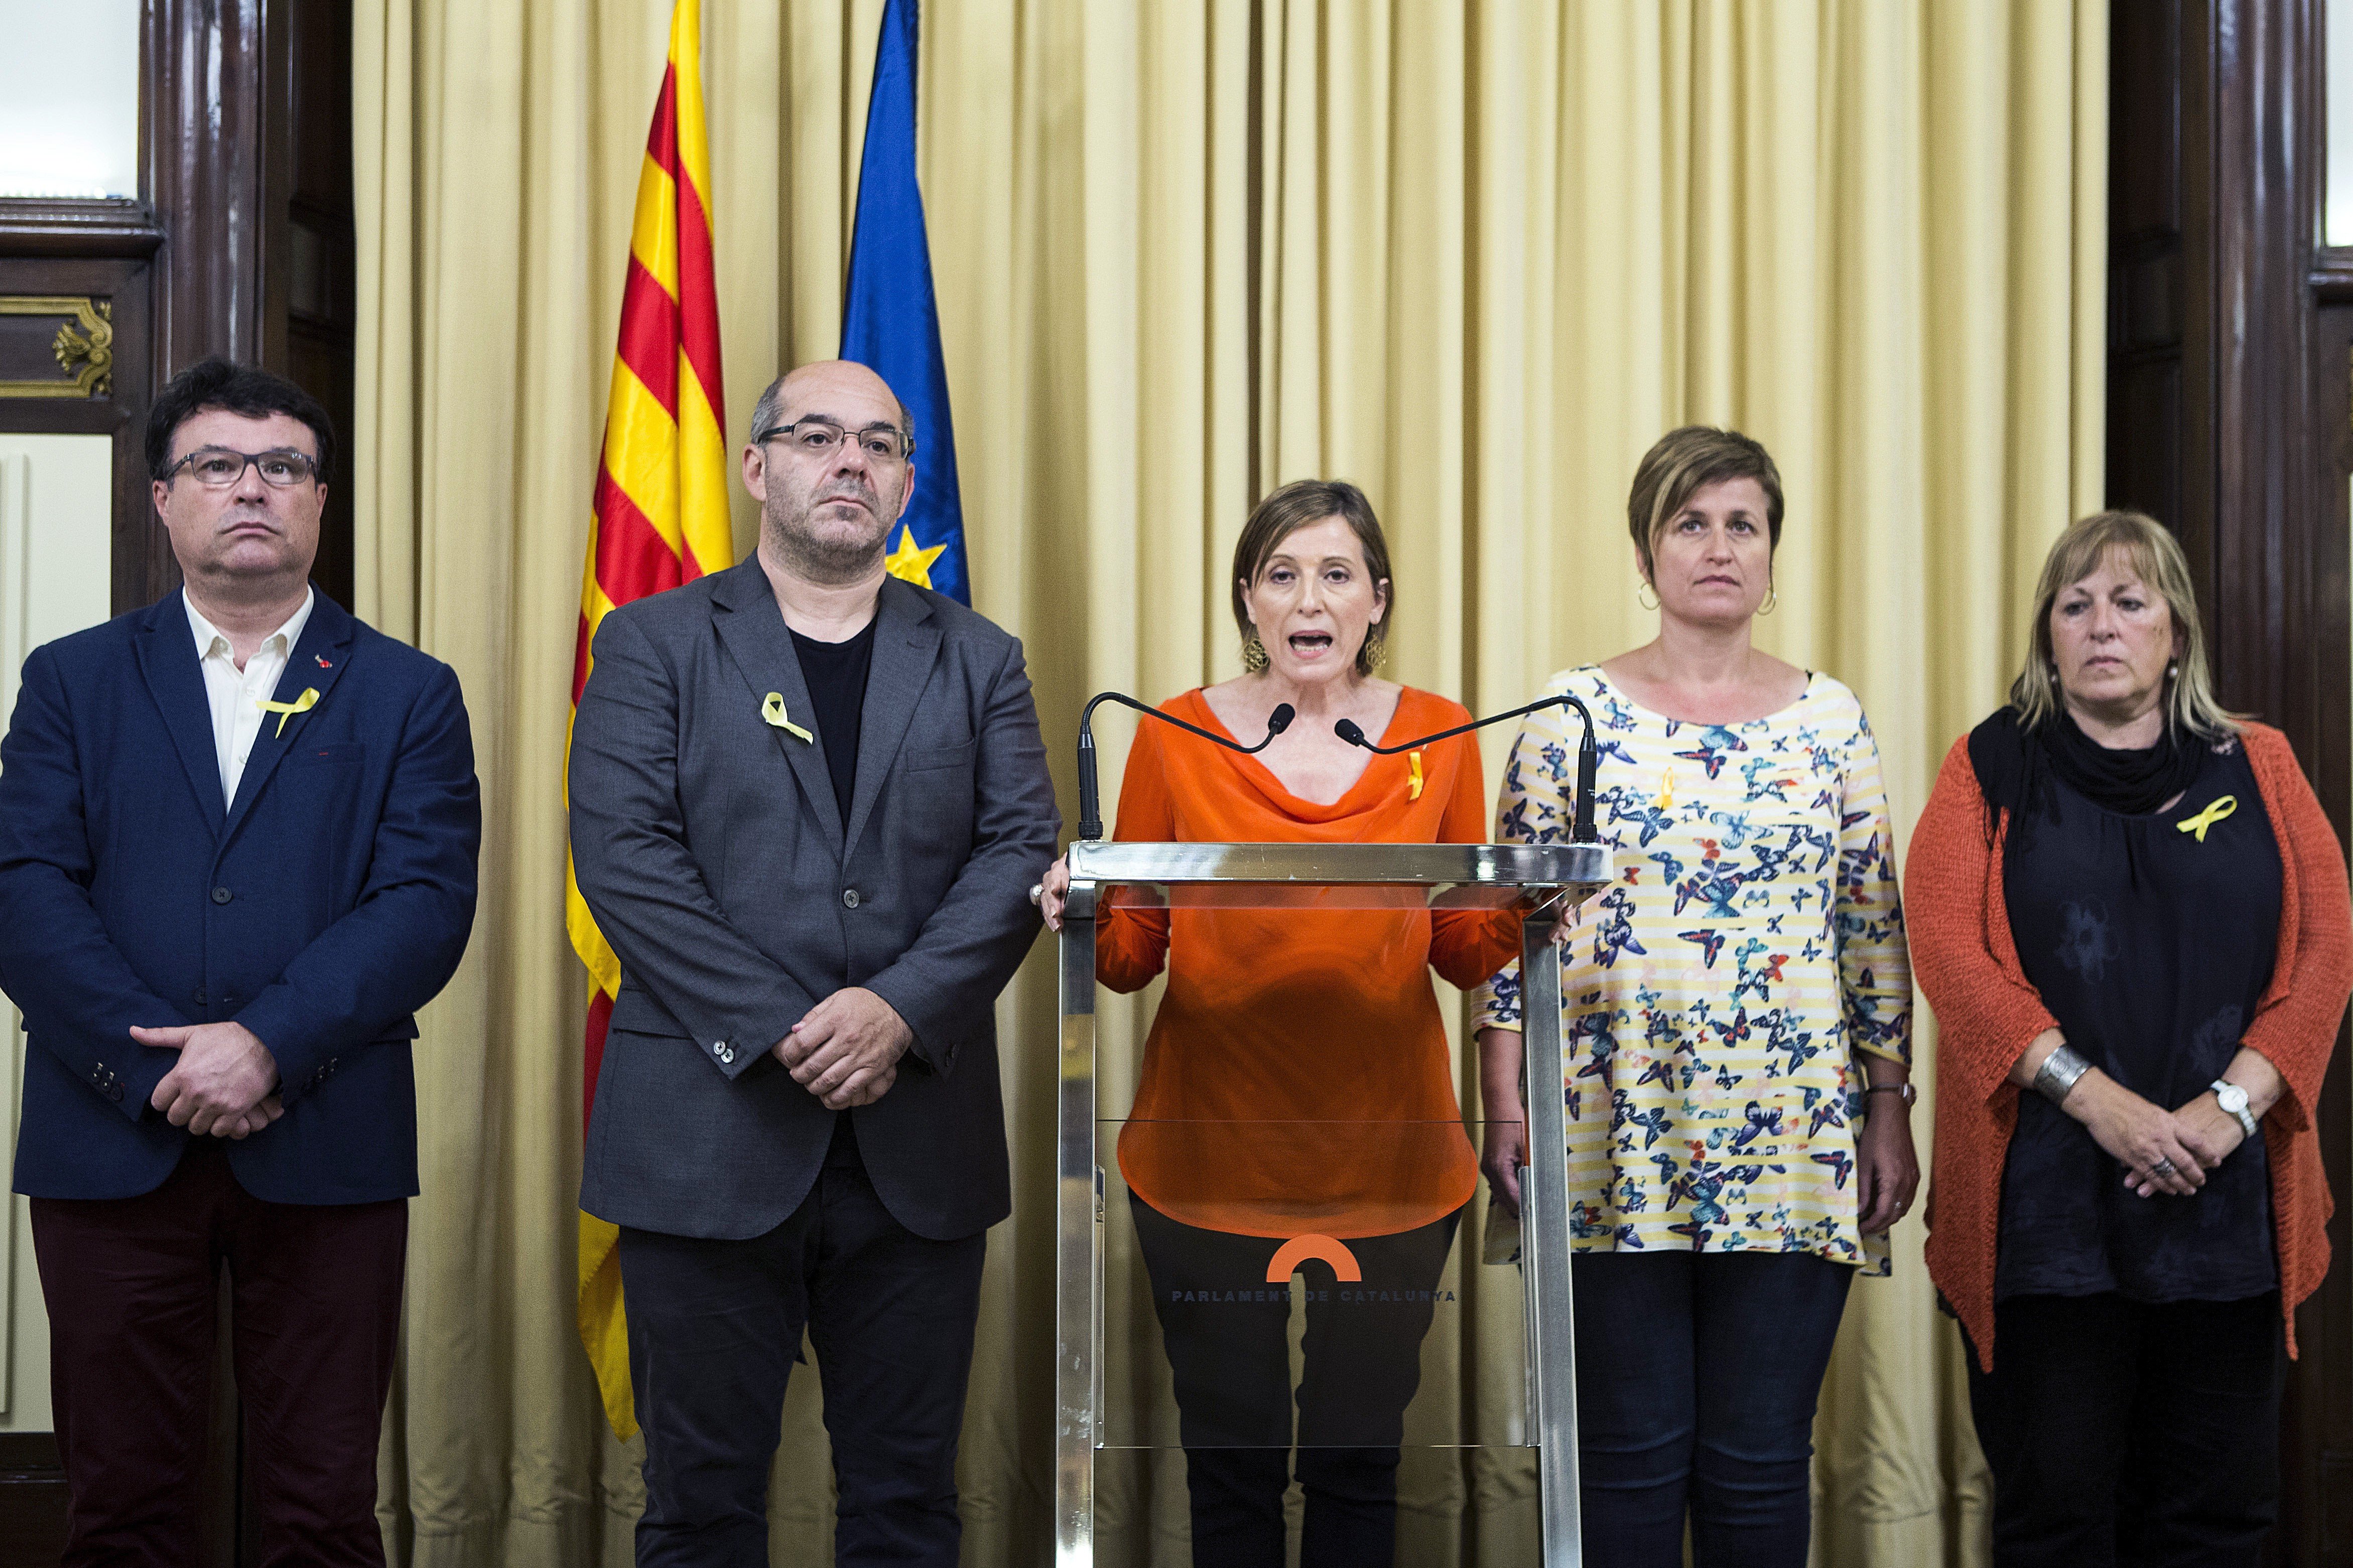 "Not one step back" promises speaker of threatened Catalan parliament